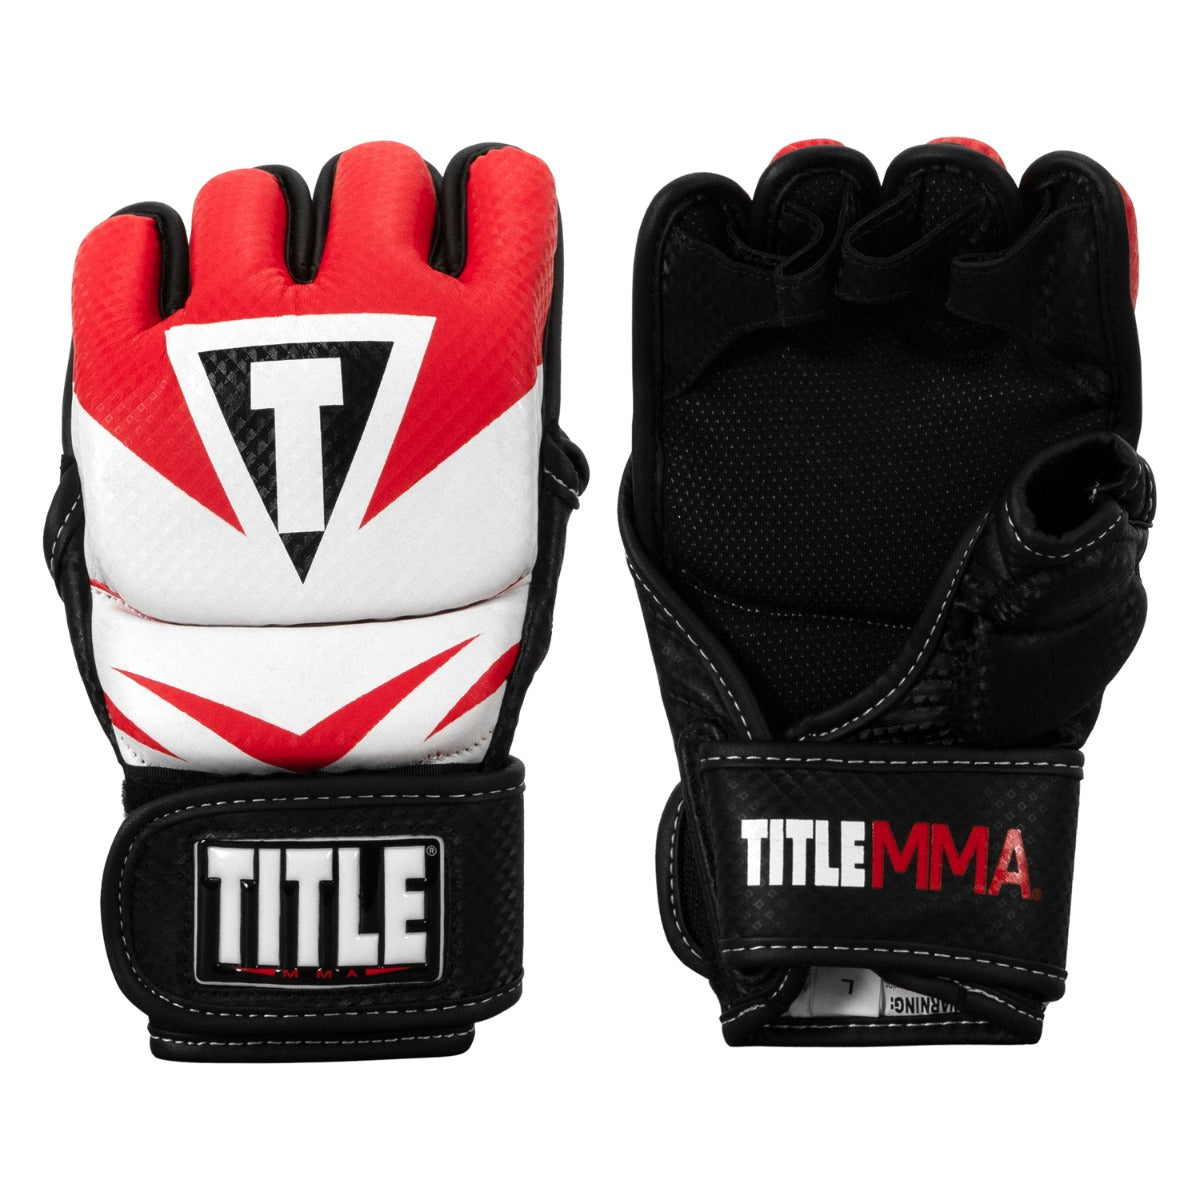 TITLE MMA Command Training Gloves